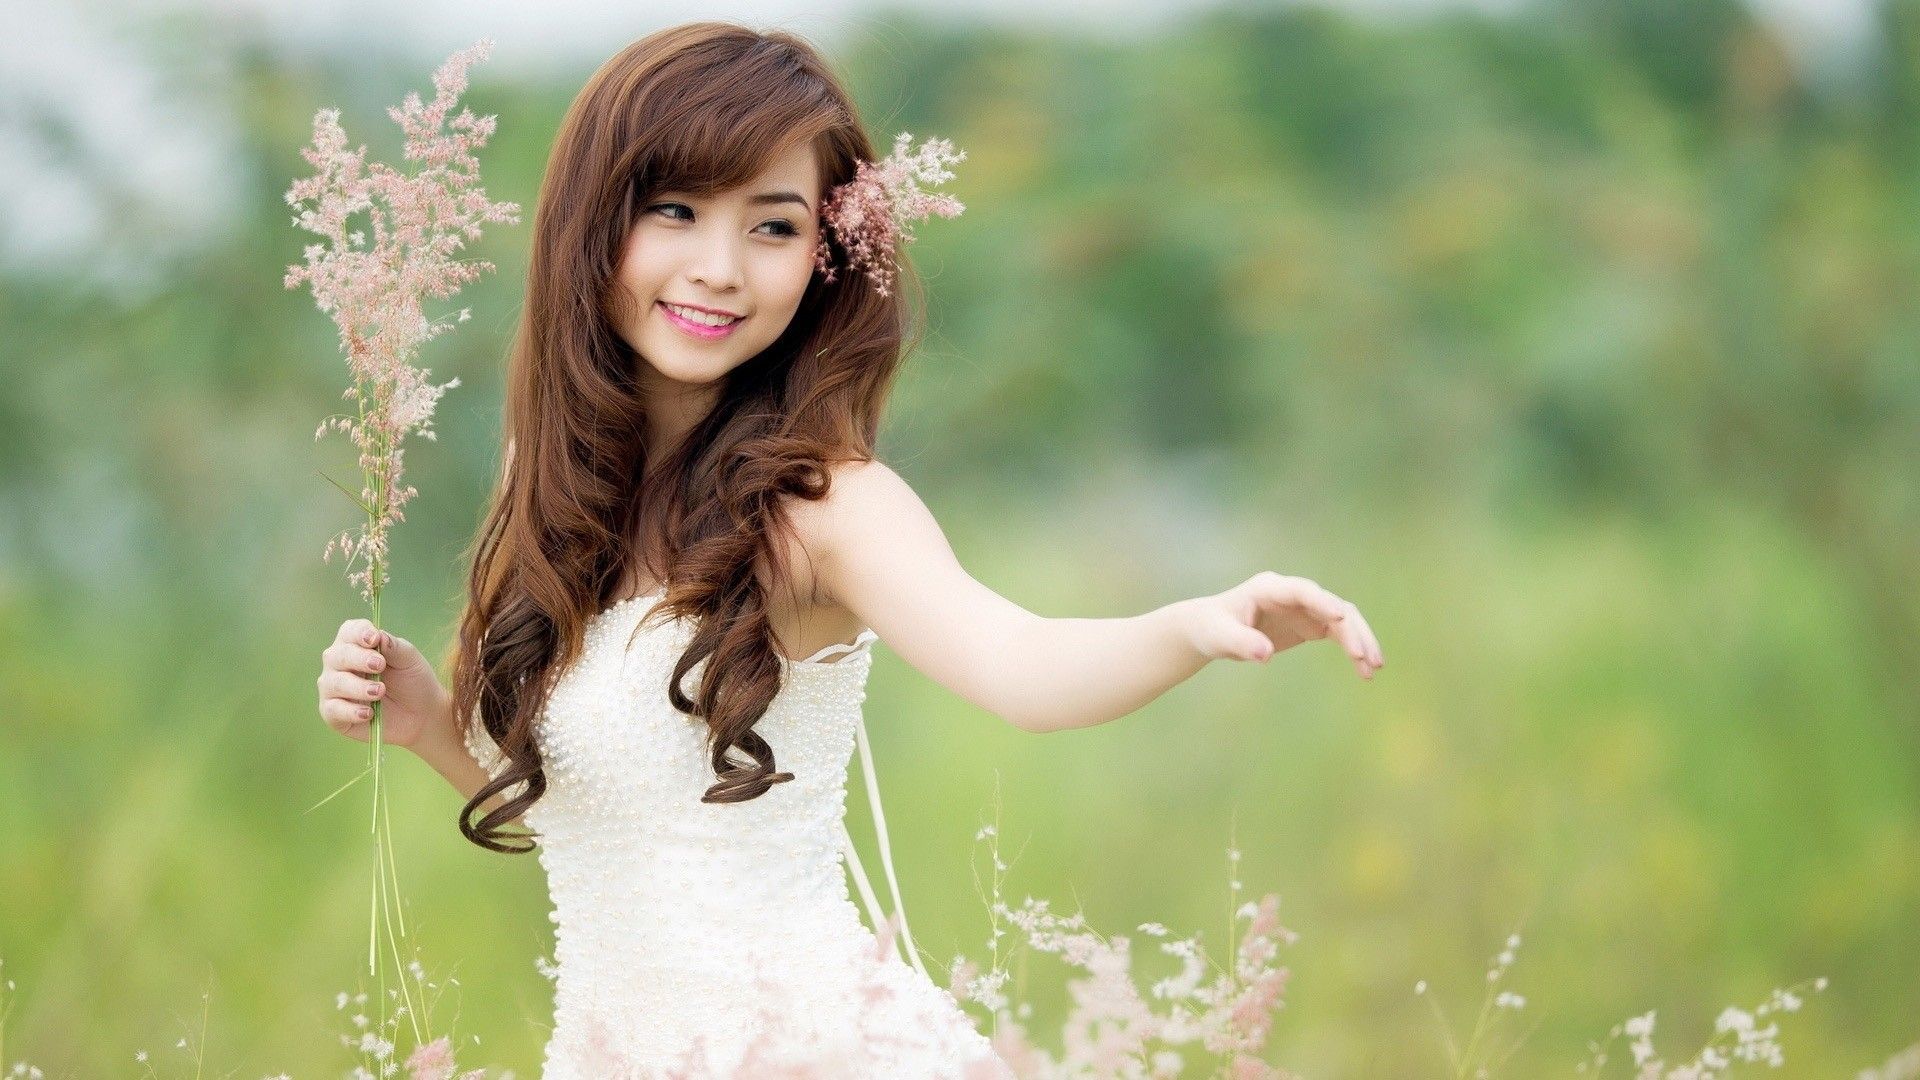 asian girl with flowers uhd wallpapers - Ultra High Definition ...